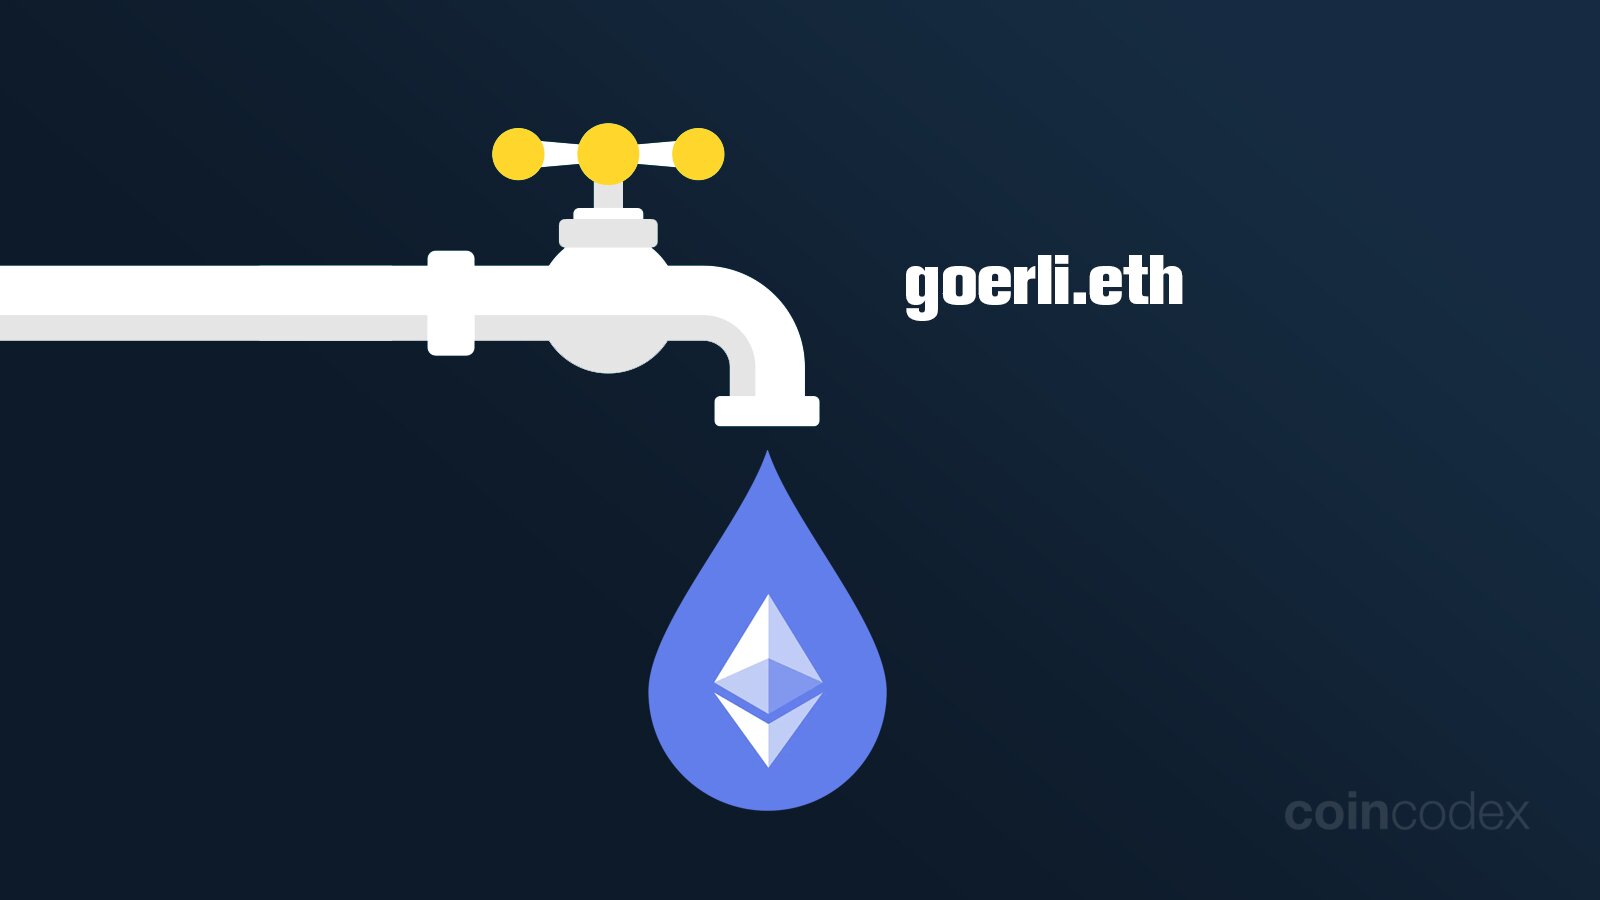 Top 5 Best Free Ethereum Faucets, Reviewed for 